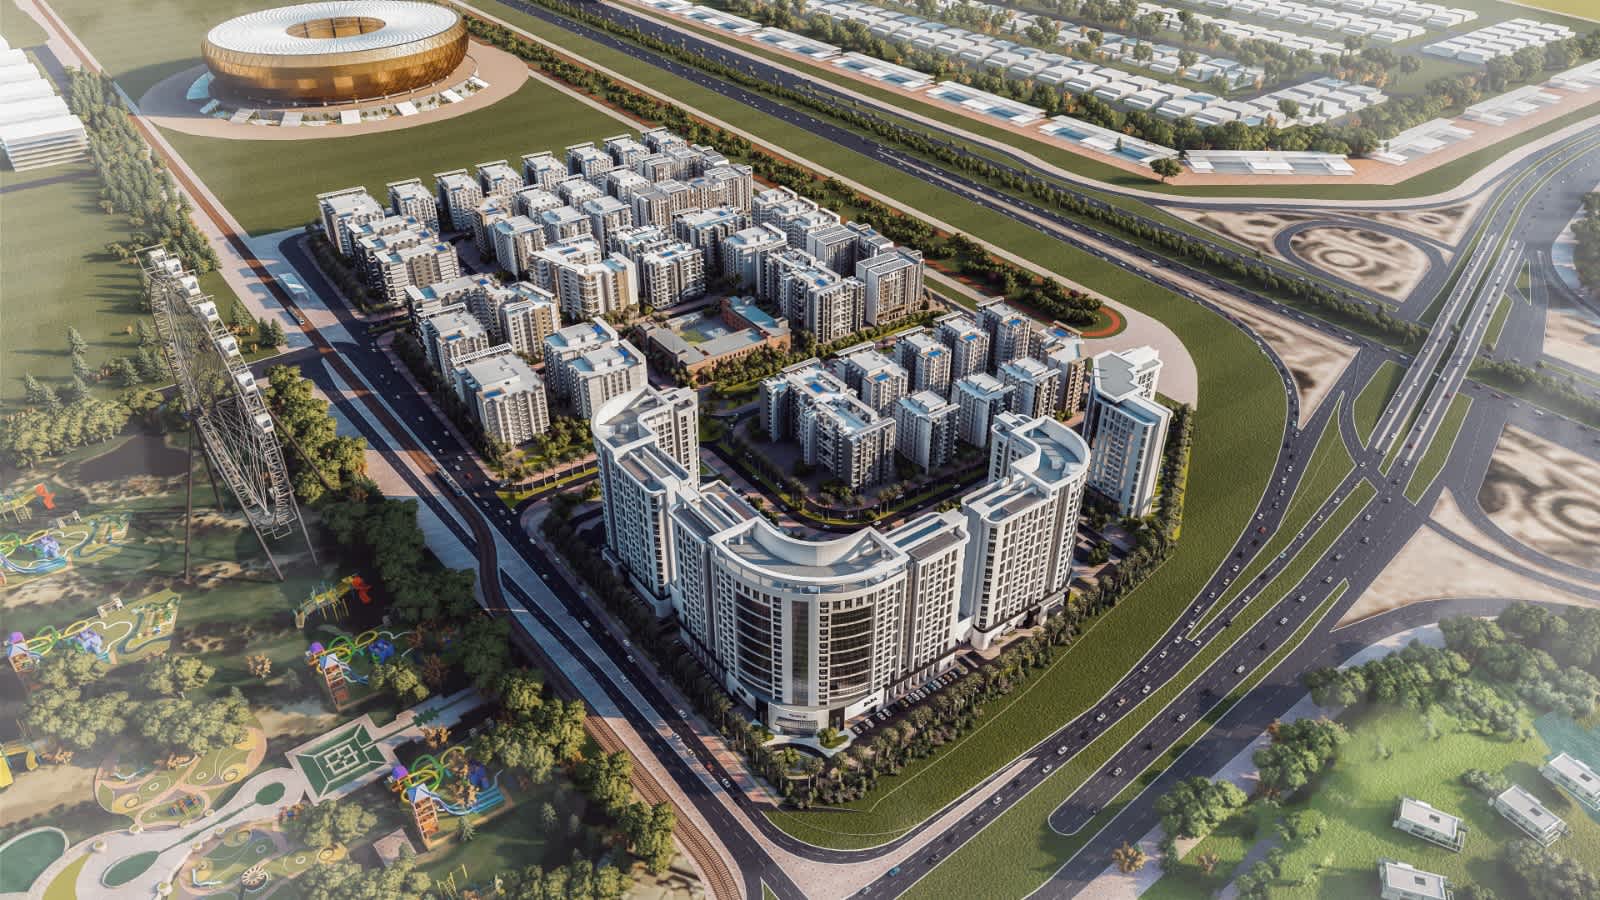 25 Spaces Real Estate - Lusail - New Development - 22nd of Sept 2021 5